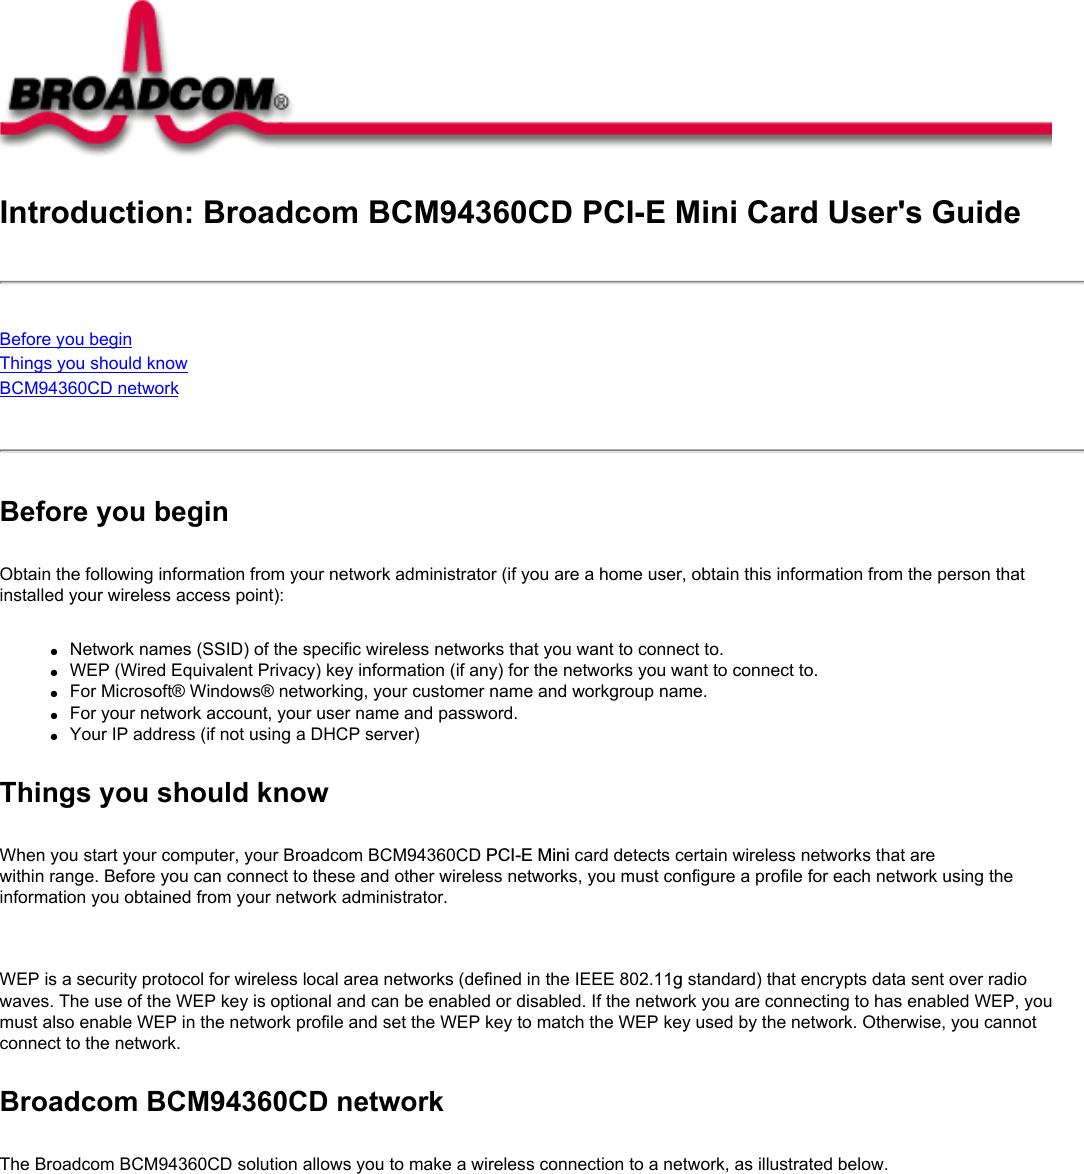 Introduction: Broadcom BCM94360CD PCI-E Mini Card User&apos;s GuideBefore you beginThings you should knowBCM94360CD network Before you beginObtain the following information from your network administrator (if you are a home user, obtain this information from the person that installed your wireless access point):●     Network names (SSID) of the specific wireless networks that you want to connect to.●     WEP (Wired Equivalent Privacy) key information (if any) for the networks you want to connect to.●     For Microsoft® Windows® networking, your customer name and workgroup name.●     For your network account, your user name and password.●     Your IP address (if not using a DHCP server)Things you should knowWhen you start your computer, your Broadcom BCM94360CD PCI-E Mini card detects certain wireless networks that are within range. Before you can connect to these and other wireless networks, you must configure a profile for each network using the information you obtained from your network administrator.   WEP is a security protocol for wireless local area networks (defined in the IEEE 802.11g standard) that encrypts data sent over radio waves. The use of the WEP key is optional and can be enabled or disabled. If the network you are connecting to has enabled WEP, you must also enable WEP in the network profile and set the WEP key to match the WEP key used by the network. Otherwise, you cannot connect to the network.Broadcom BCM94360CD networkThe Broadcom BCM94360CD solution allows you to make a wireless connection to a network, as illustrated below.